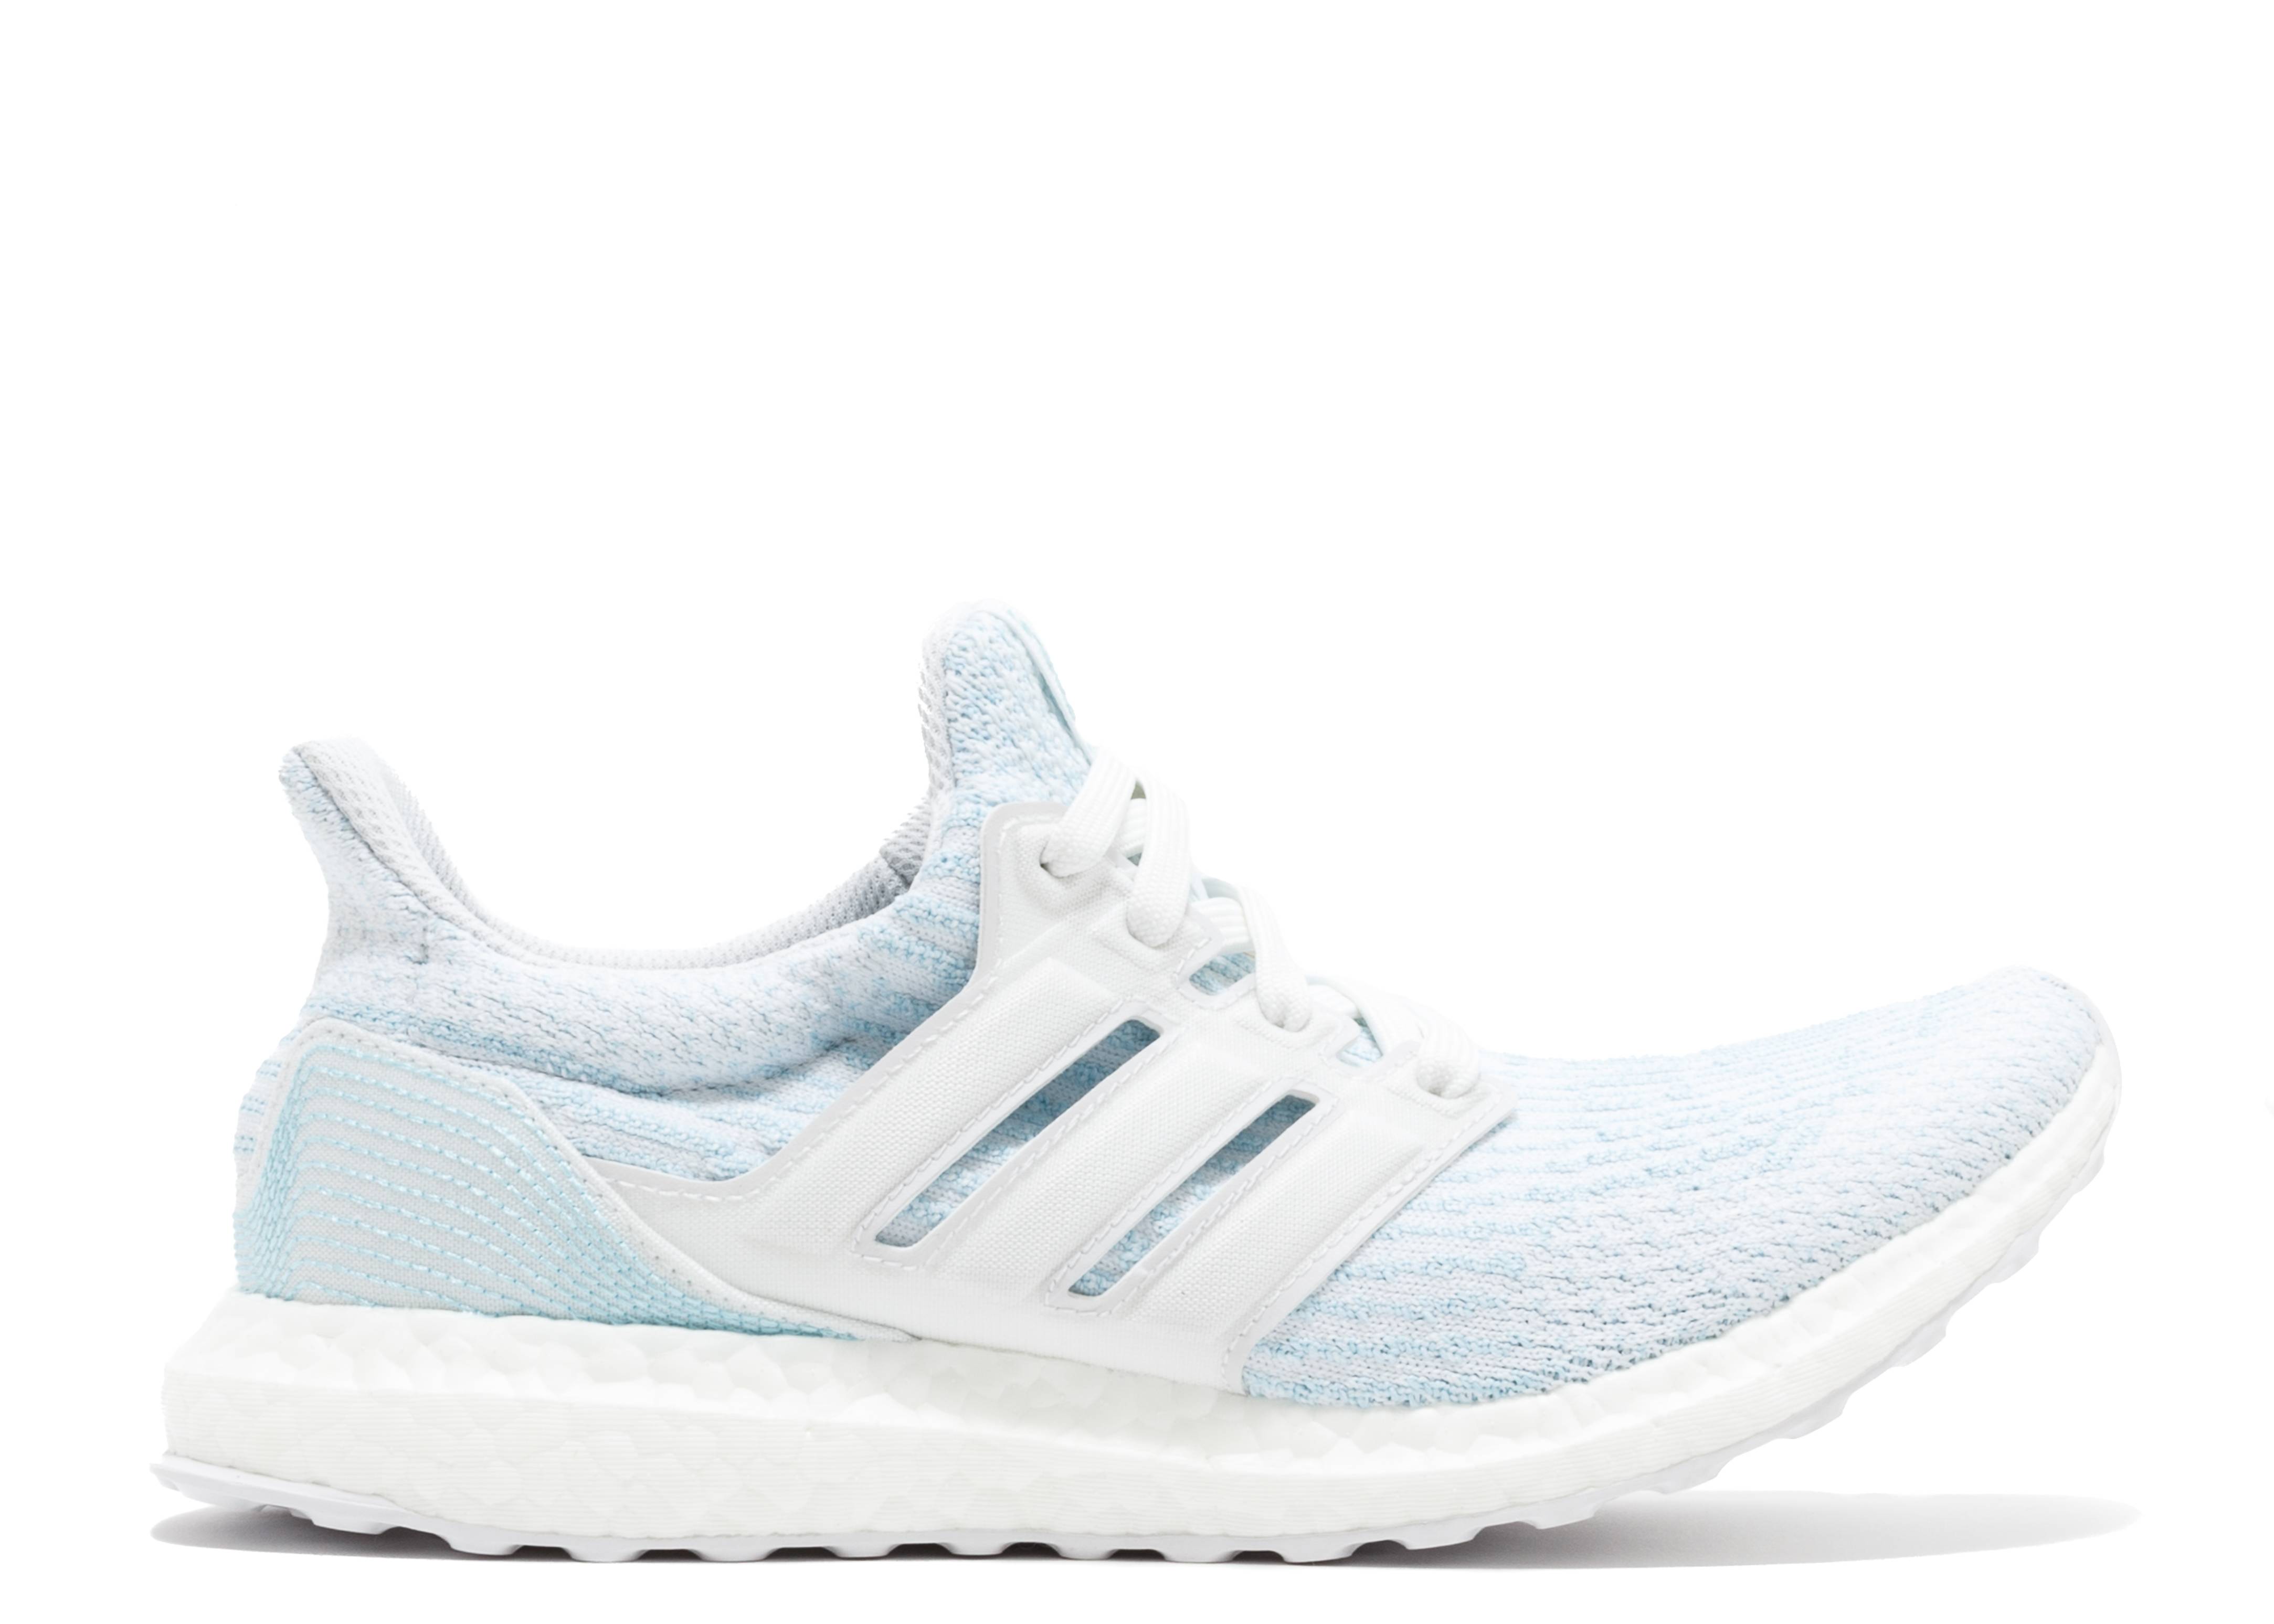 Parley x UltraBoost 3.0 Limited 'Icey Blue'